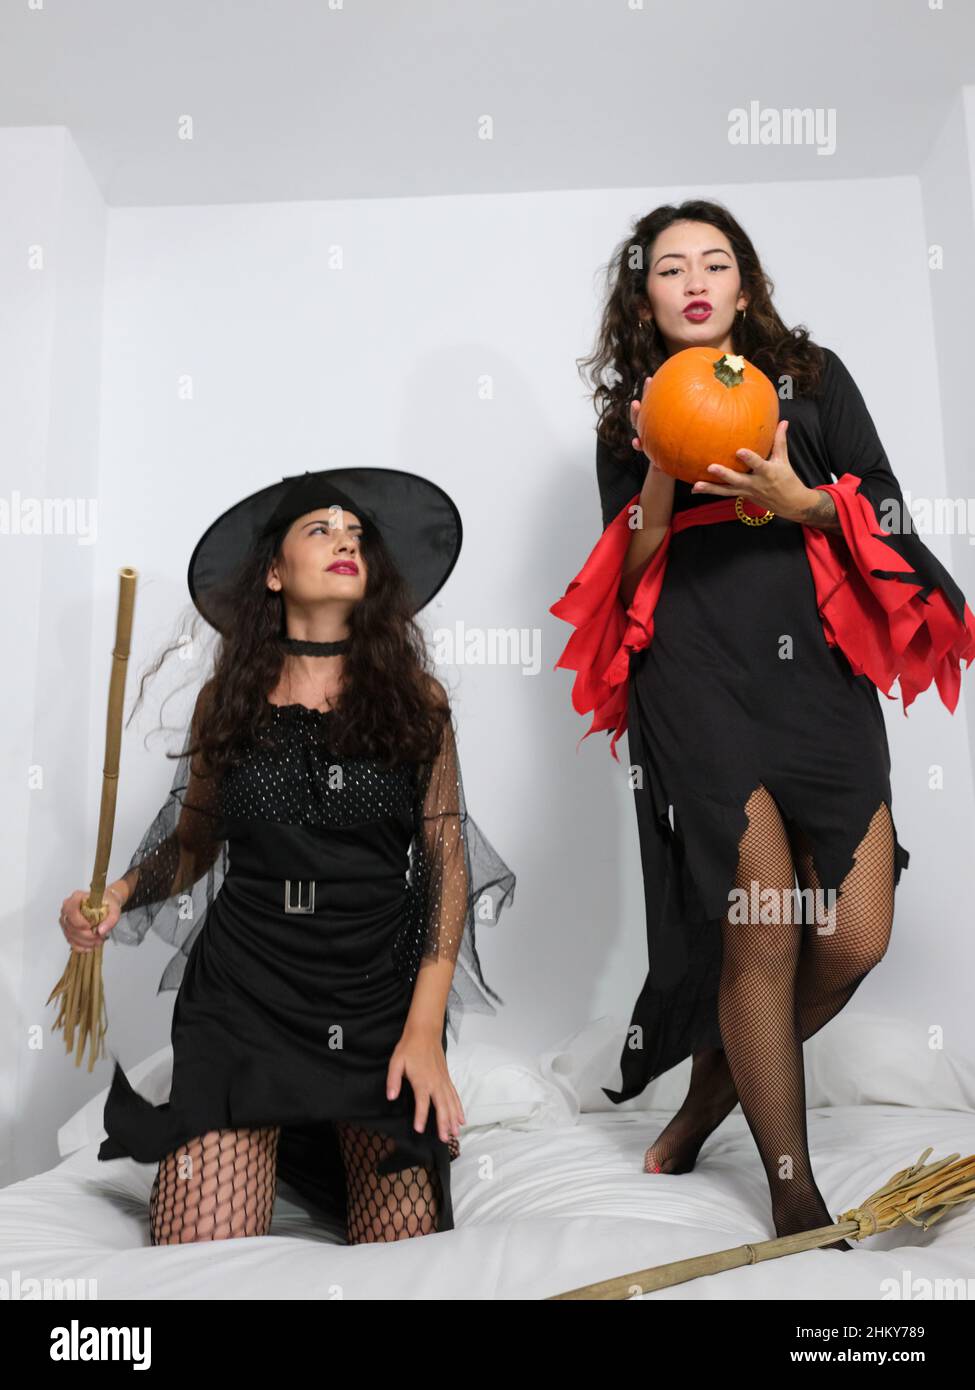 Two young latinas dressed as witches in halloween costumes having fun on the bedroom bed with a pumpkin Stock Photo